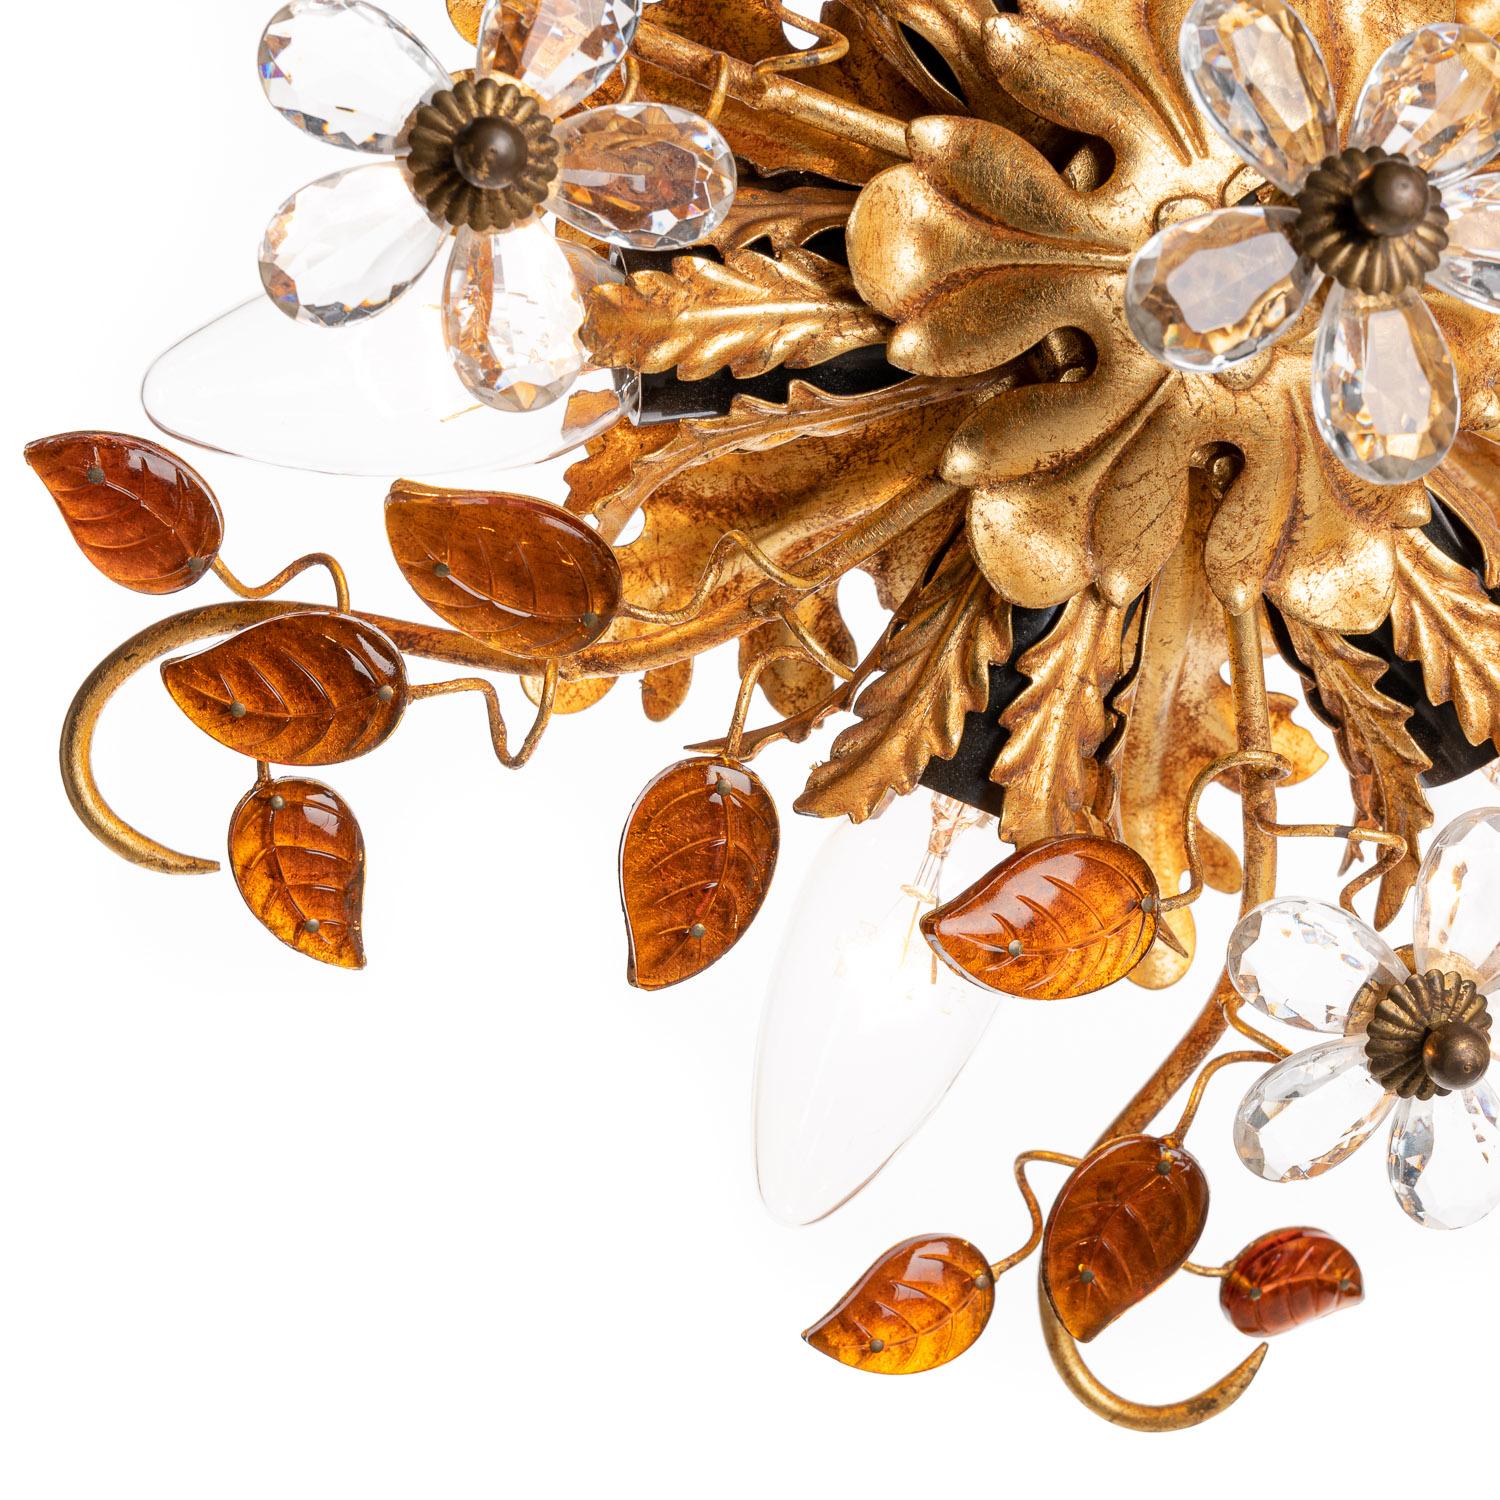 This intricately-crafted piece comes from the 1970s designer Bani Firenze. The brass-colored arms stretch and weave together from the base, branching out to beautifully ornate amber glass leaves and crystal glass flowers. The base contains six